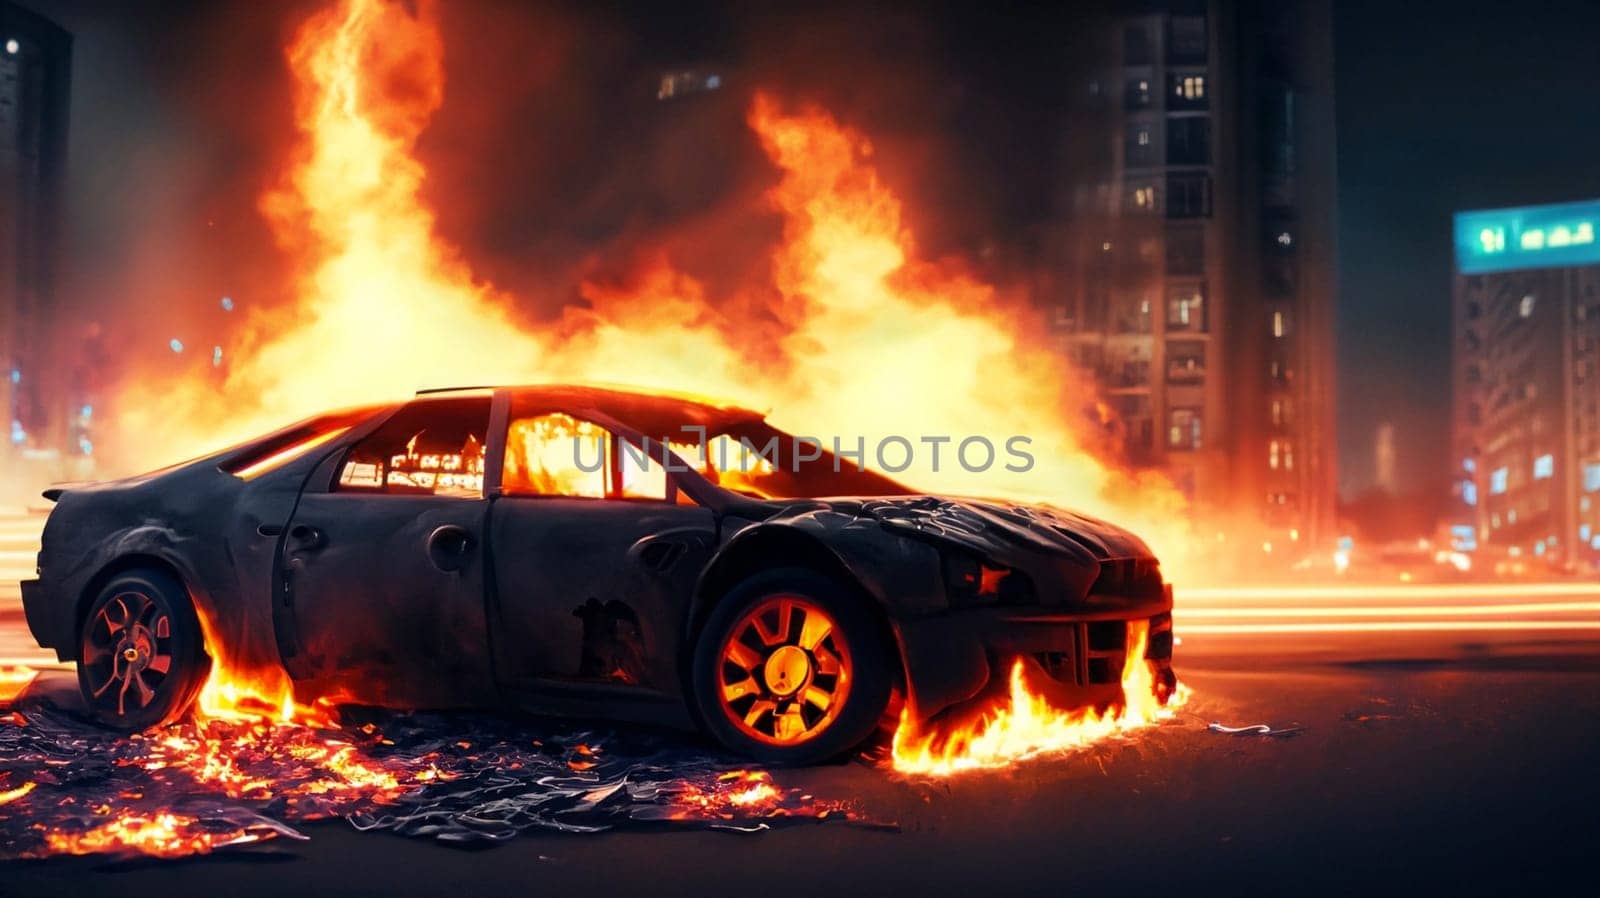 Disorders, protests in the Europa. Burning car on a city street, smoke and flames all around. Dispersal of demonstrations, patrolling during riots. Clashes on Europe streets, mixed media image. High quality photo